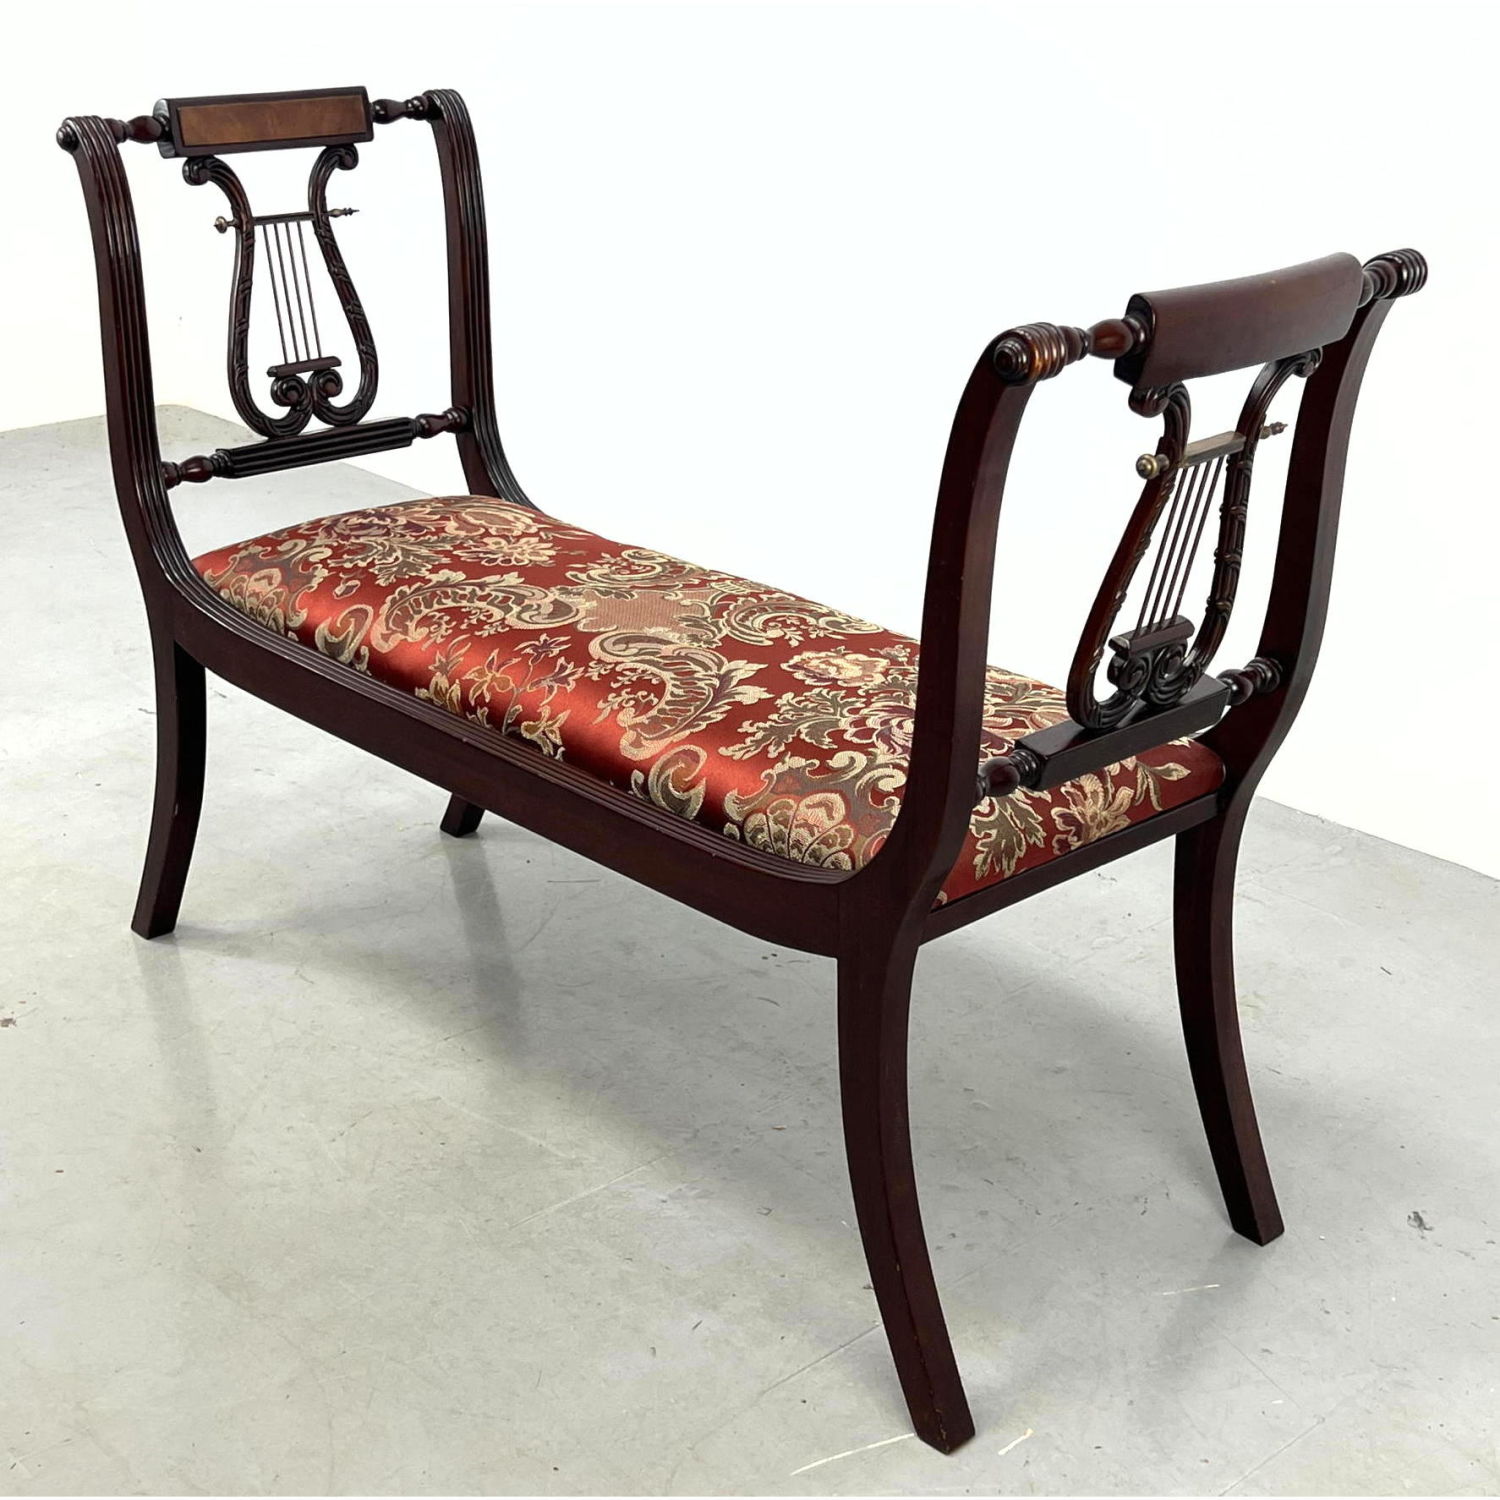 Lyre side mahogany bench with harp